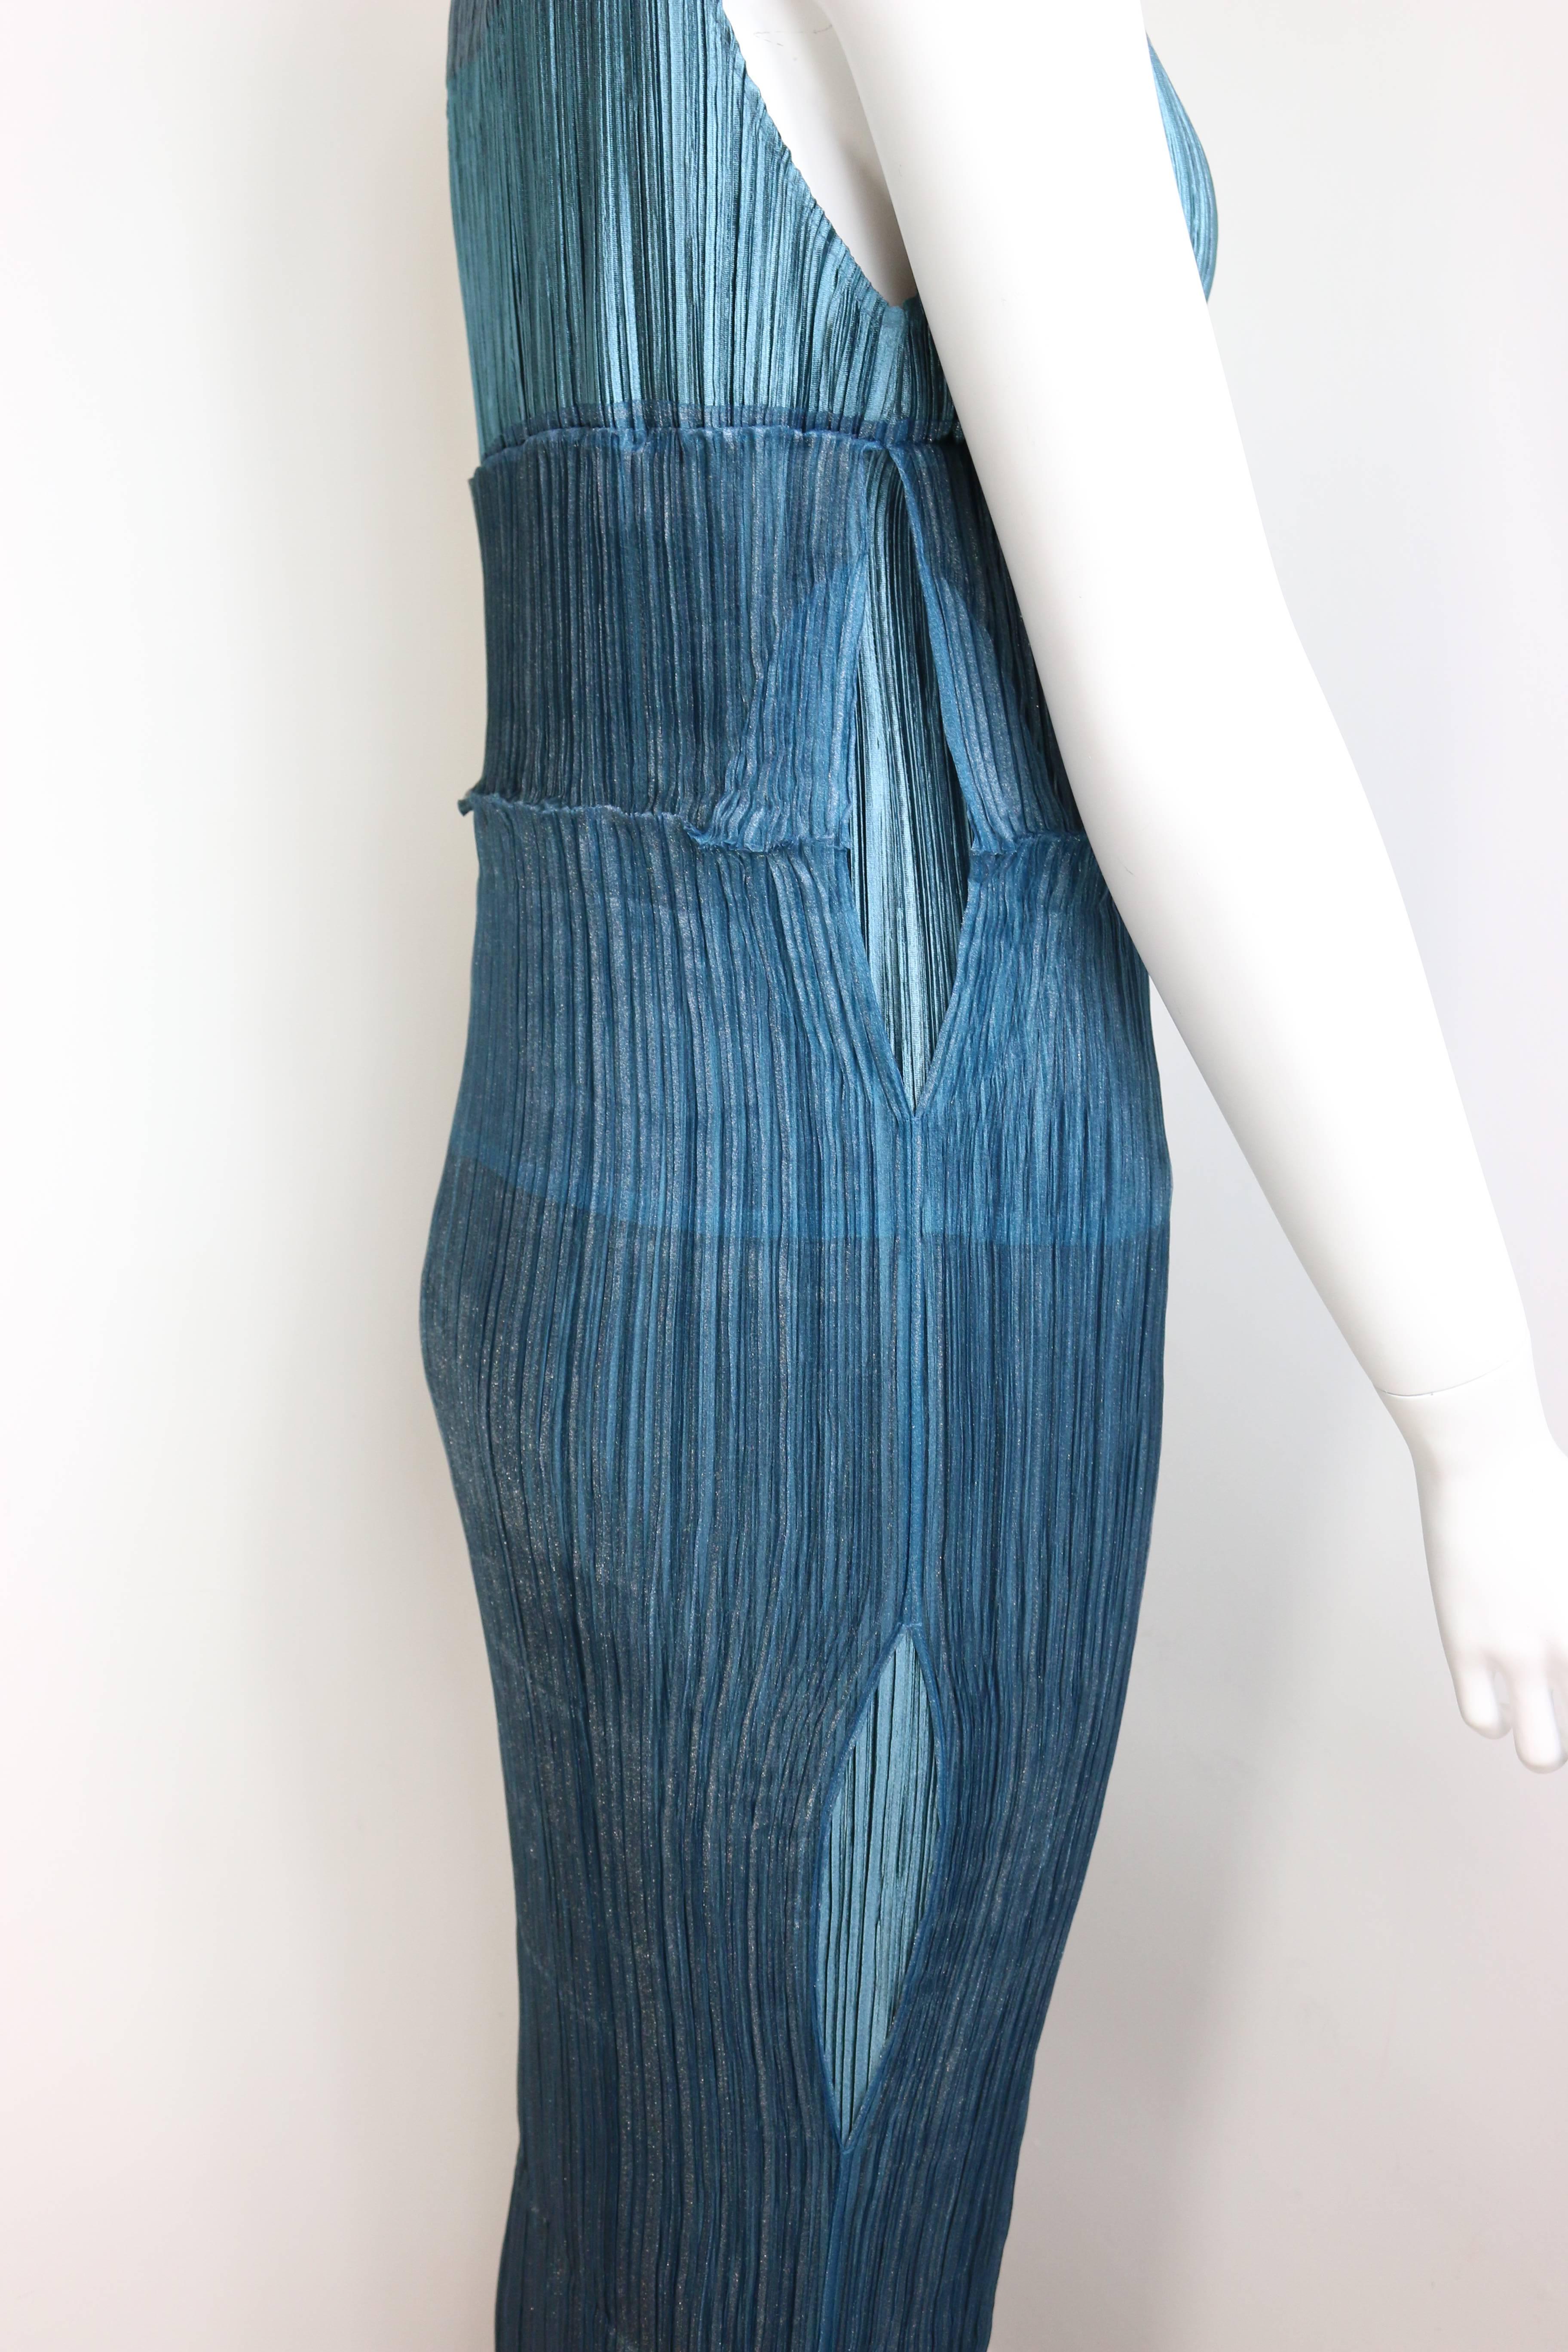 - 90s Issey Miyake two layers blue pleated maxi dress. 

- Height: 143cm I Bust: 40cm I Waist: 70cm. 

- Made in Japan. 

- Size M. 

- 100% Polyester. 

